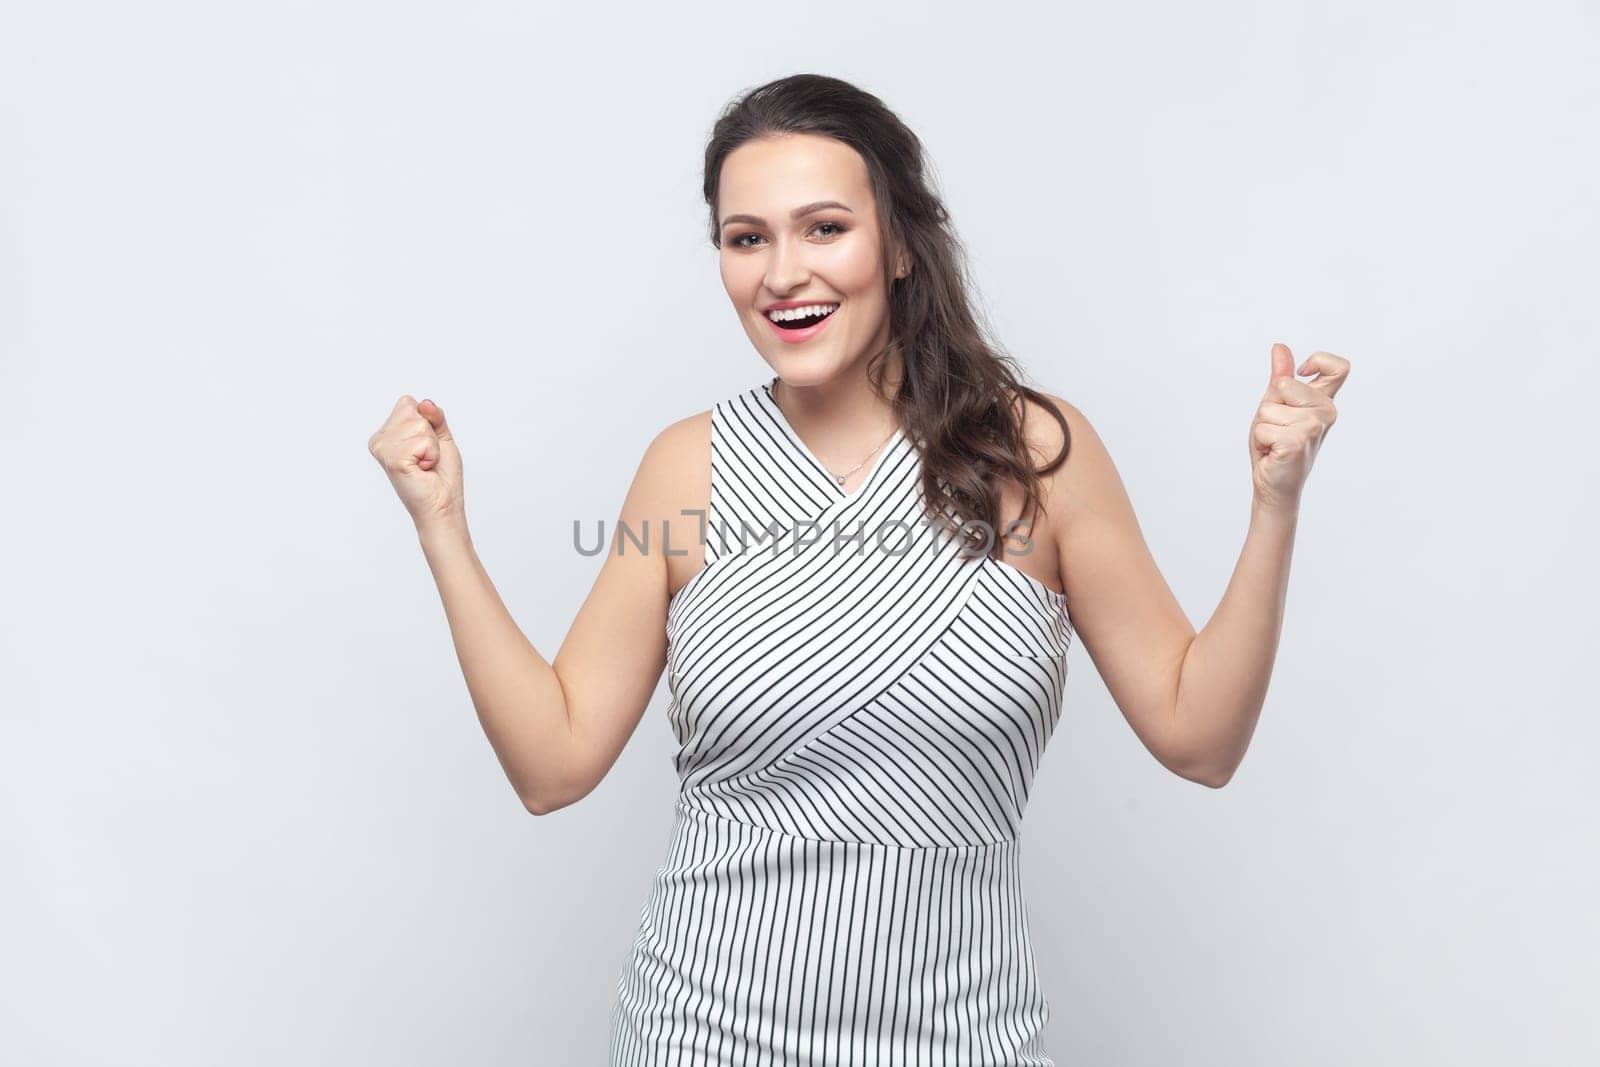 Emotional brunette woman raises clenched fists, exclaims with excitement, rejoices sweet success, feels taste of victory, wearing striped dress. Indoor studio shot isolated on gray background.